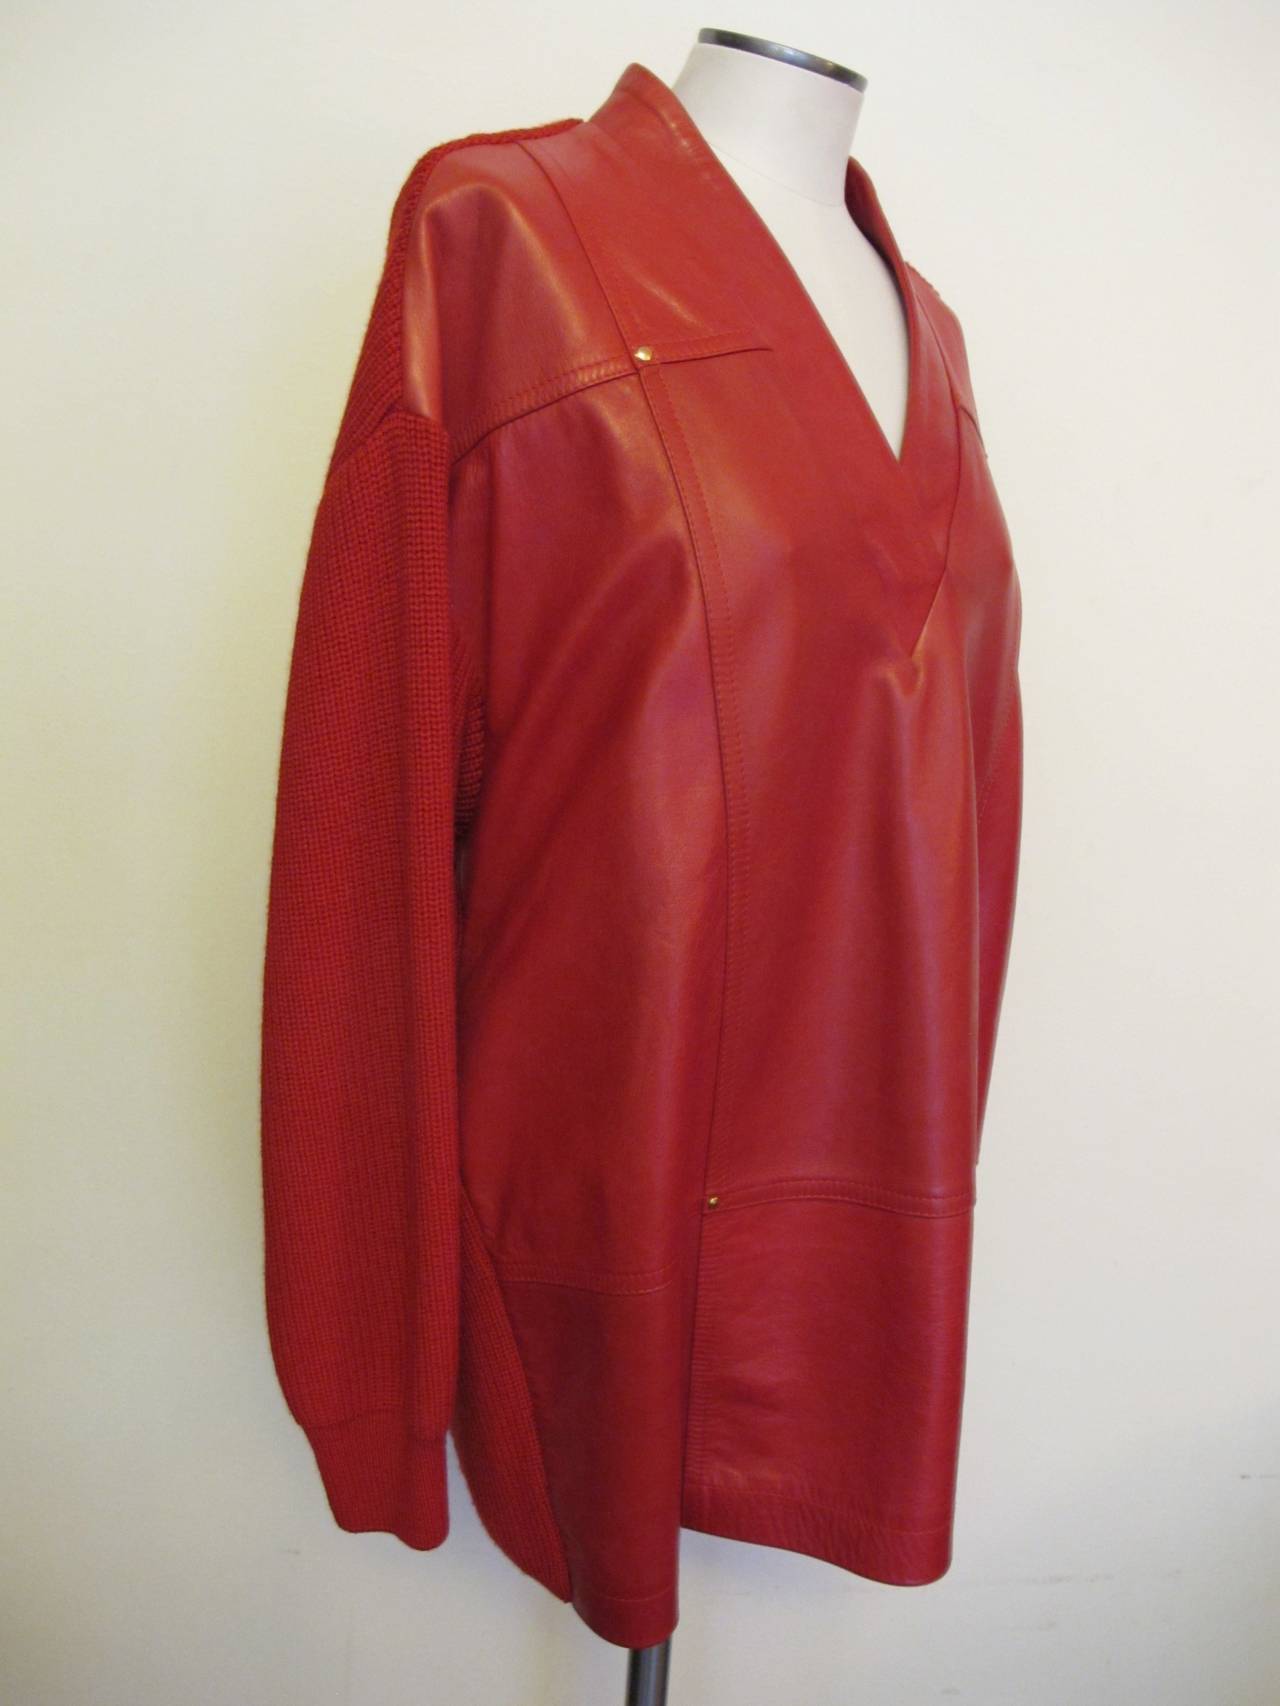 Fabulous luscious red leather pull-over sweater with thick knit on sleeves and back of sweater. Two gold studs serve as decorative pieces on the front of the jacket. The jacket is marked US Size 4 and is obviously mis-marked. The Statement piece is